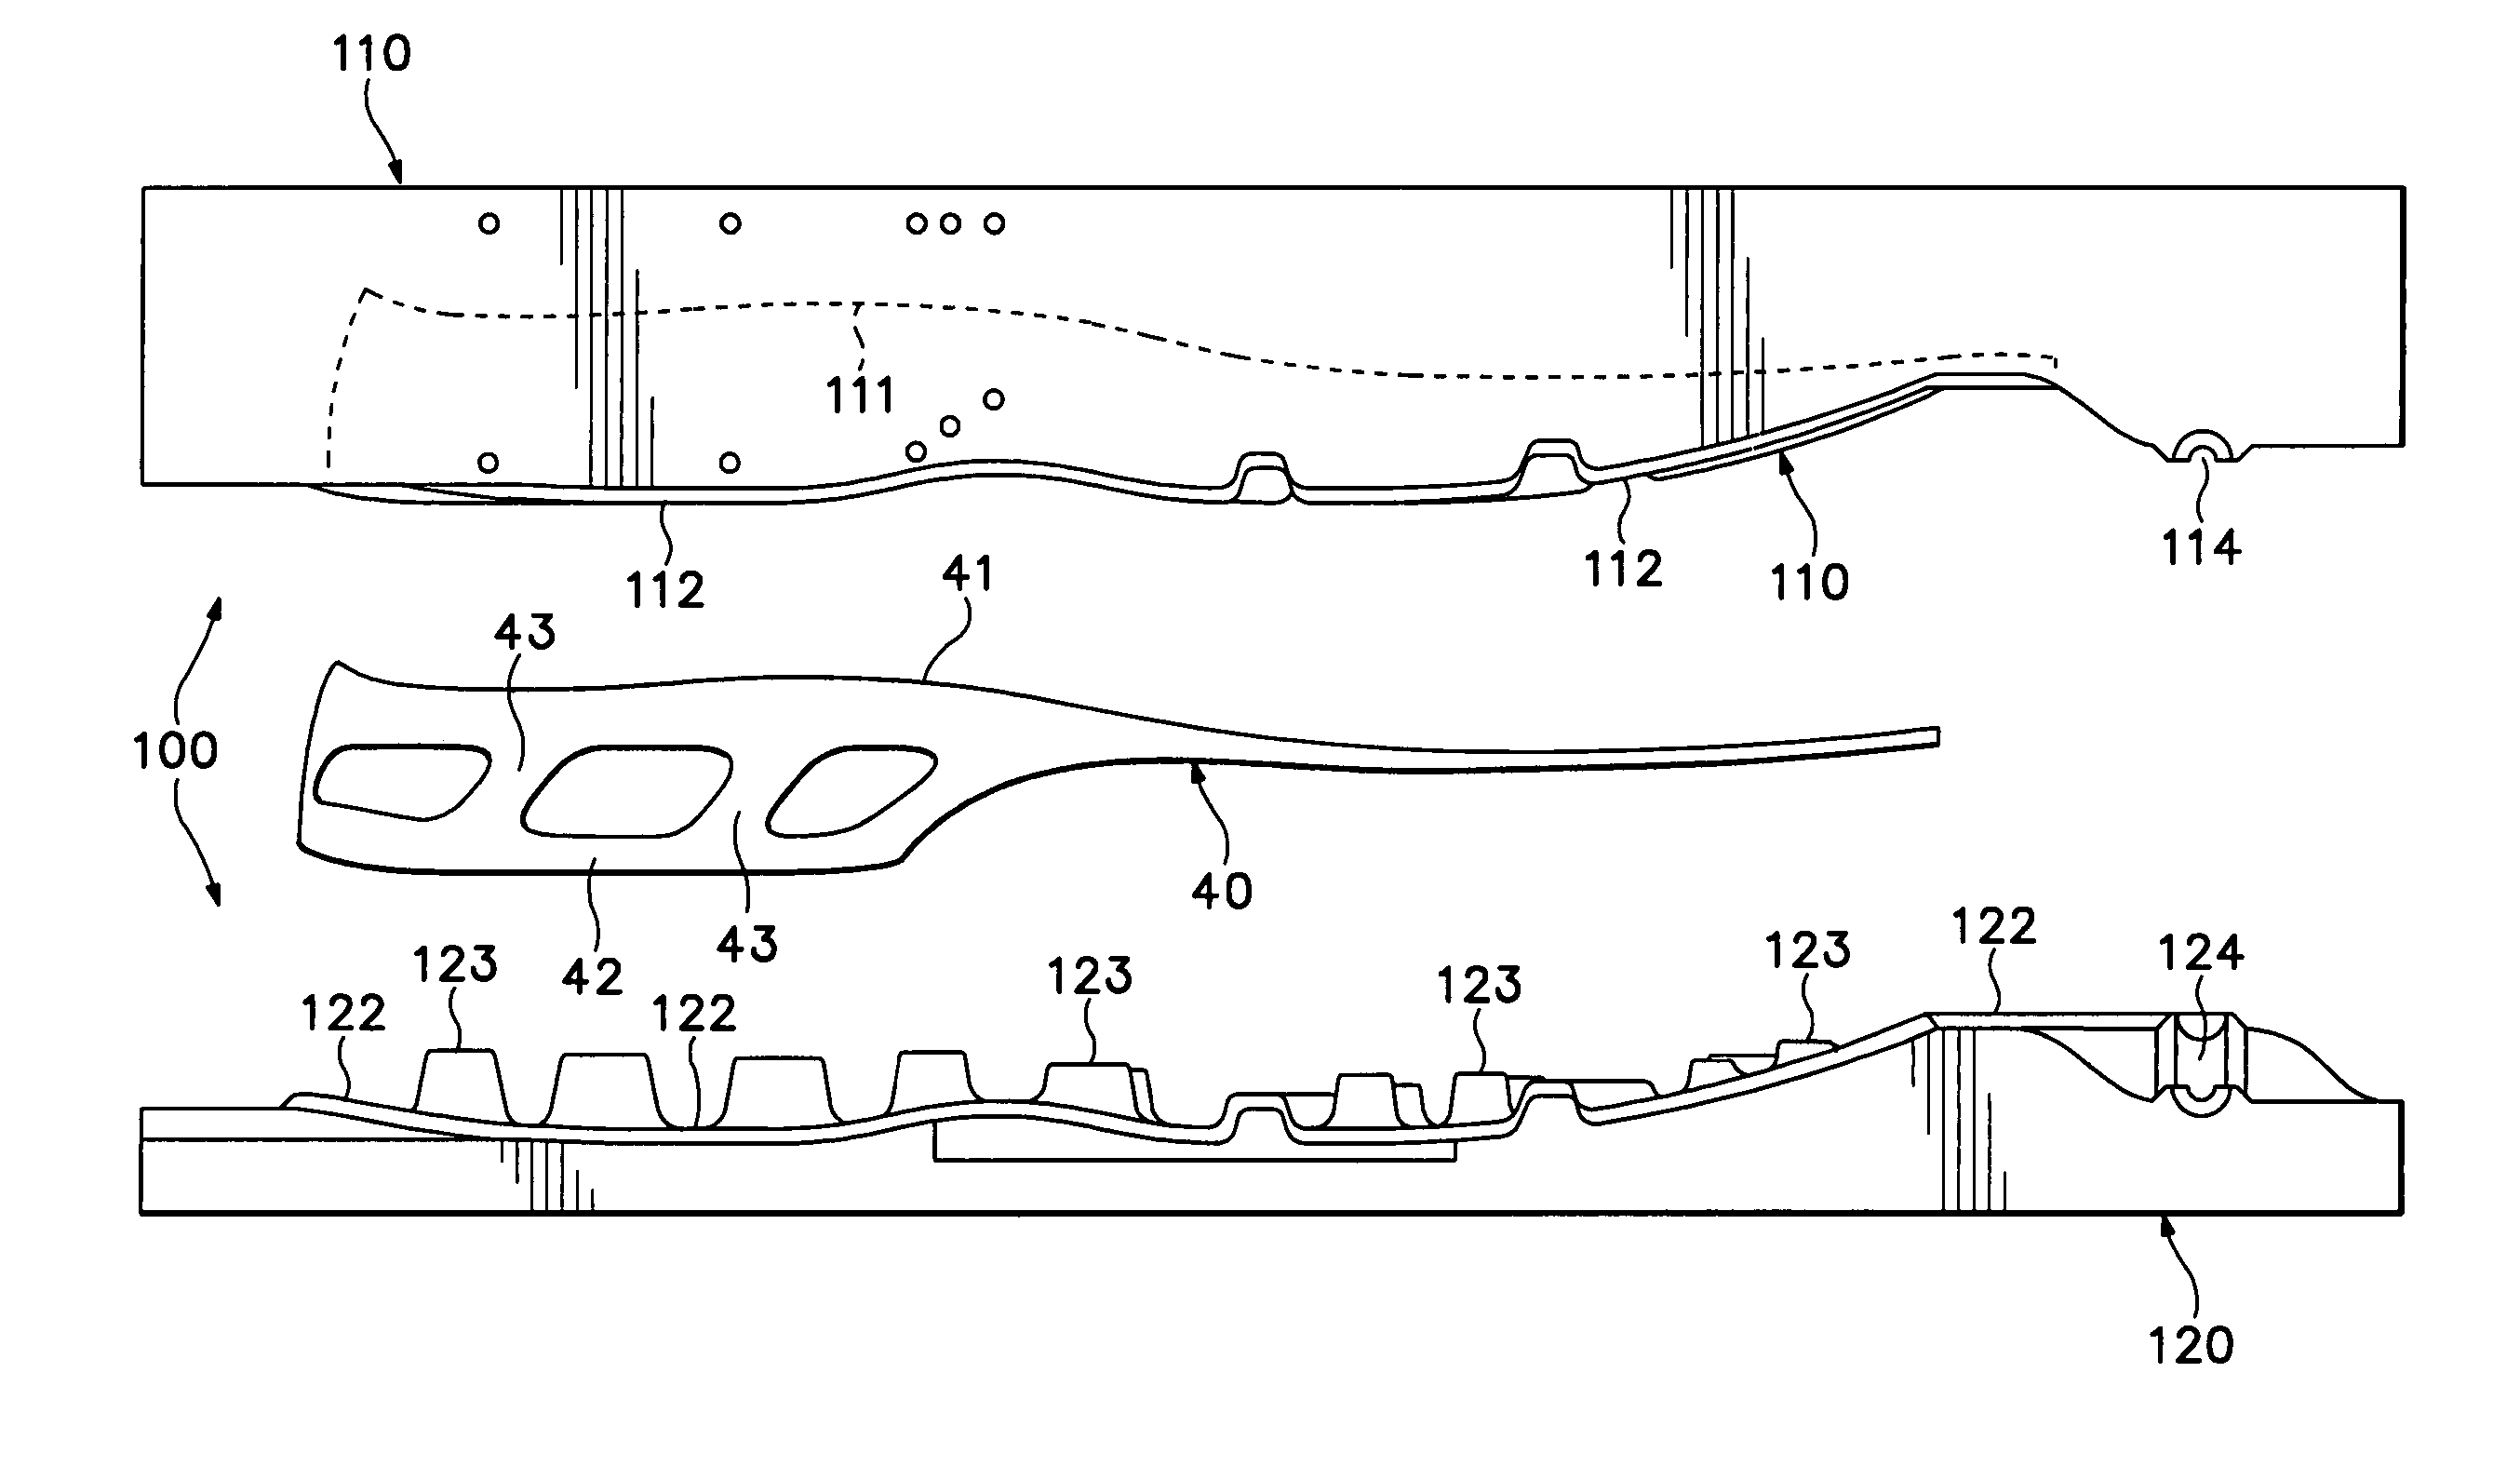 Method of making article of footwear having a fluid-filled bladder with a reinforcing structure